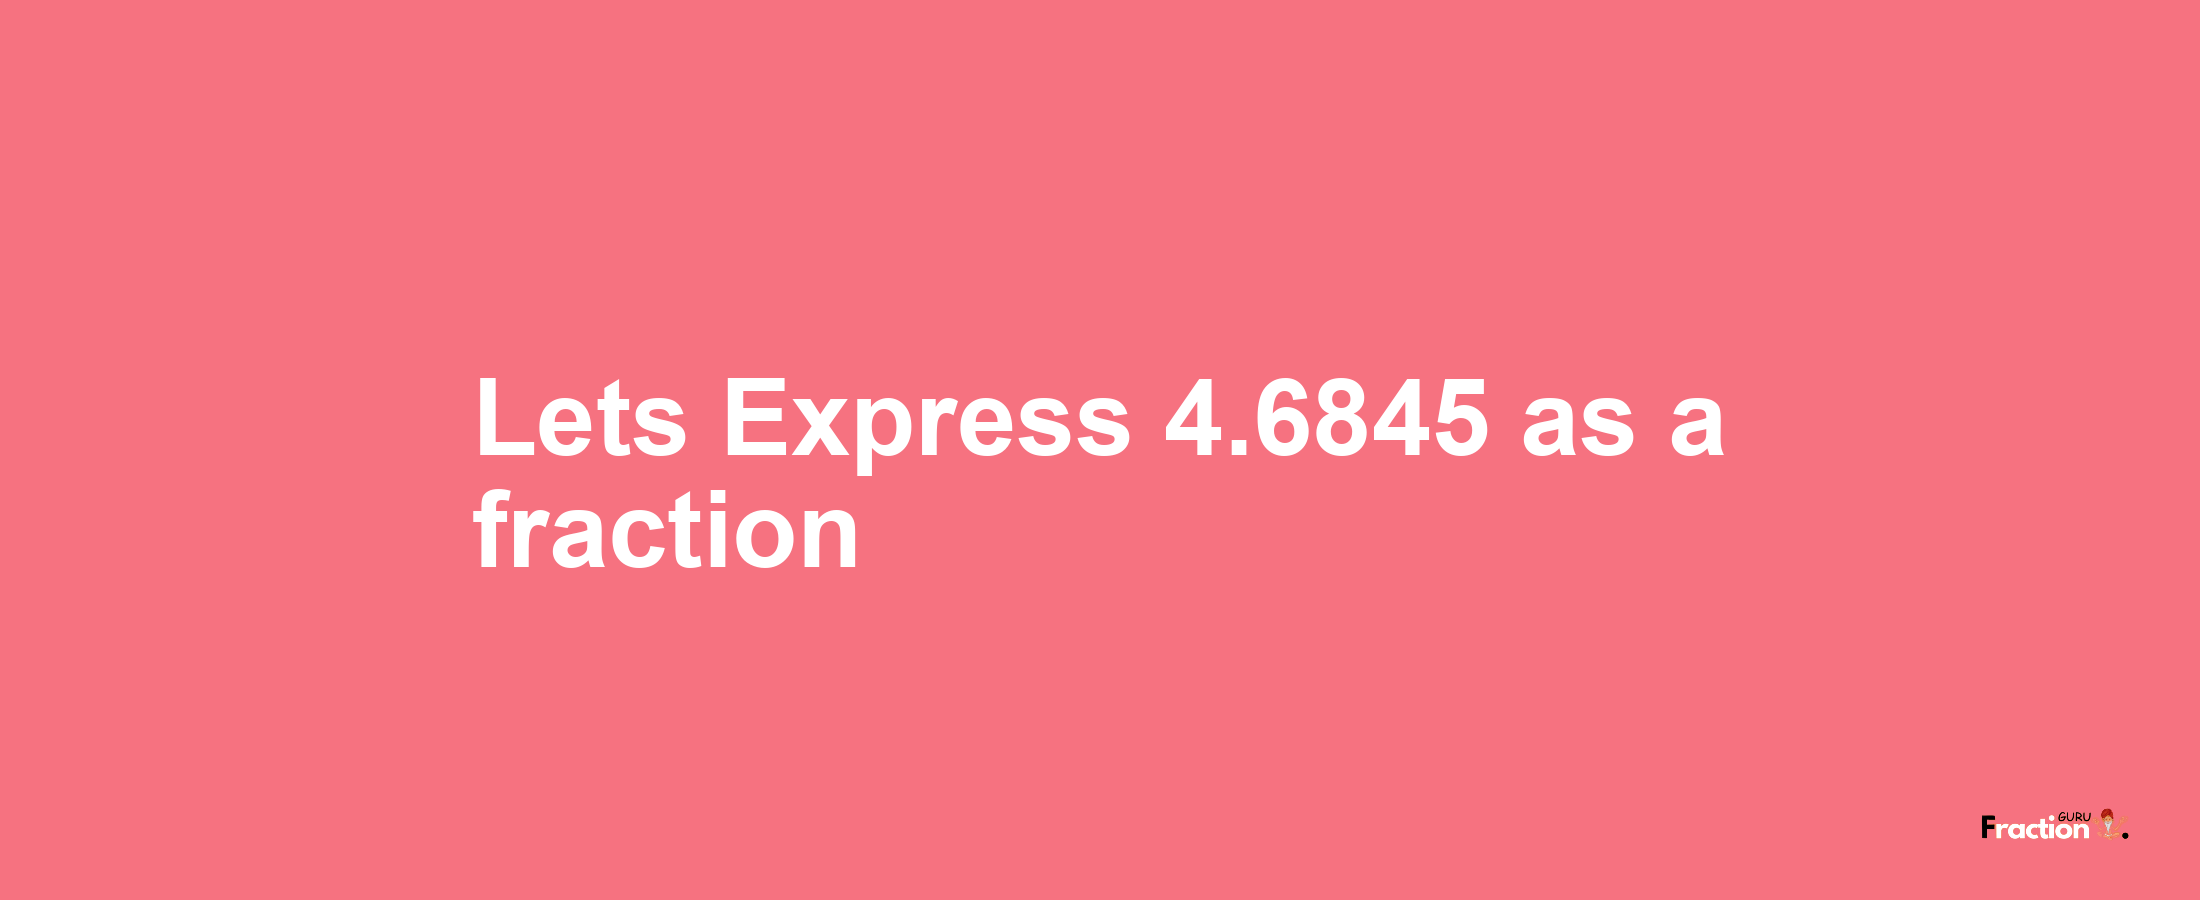 Lets Express 4.6845 as afraction